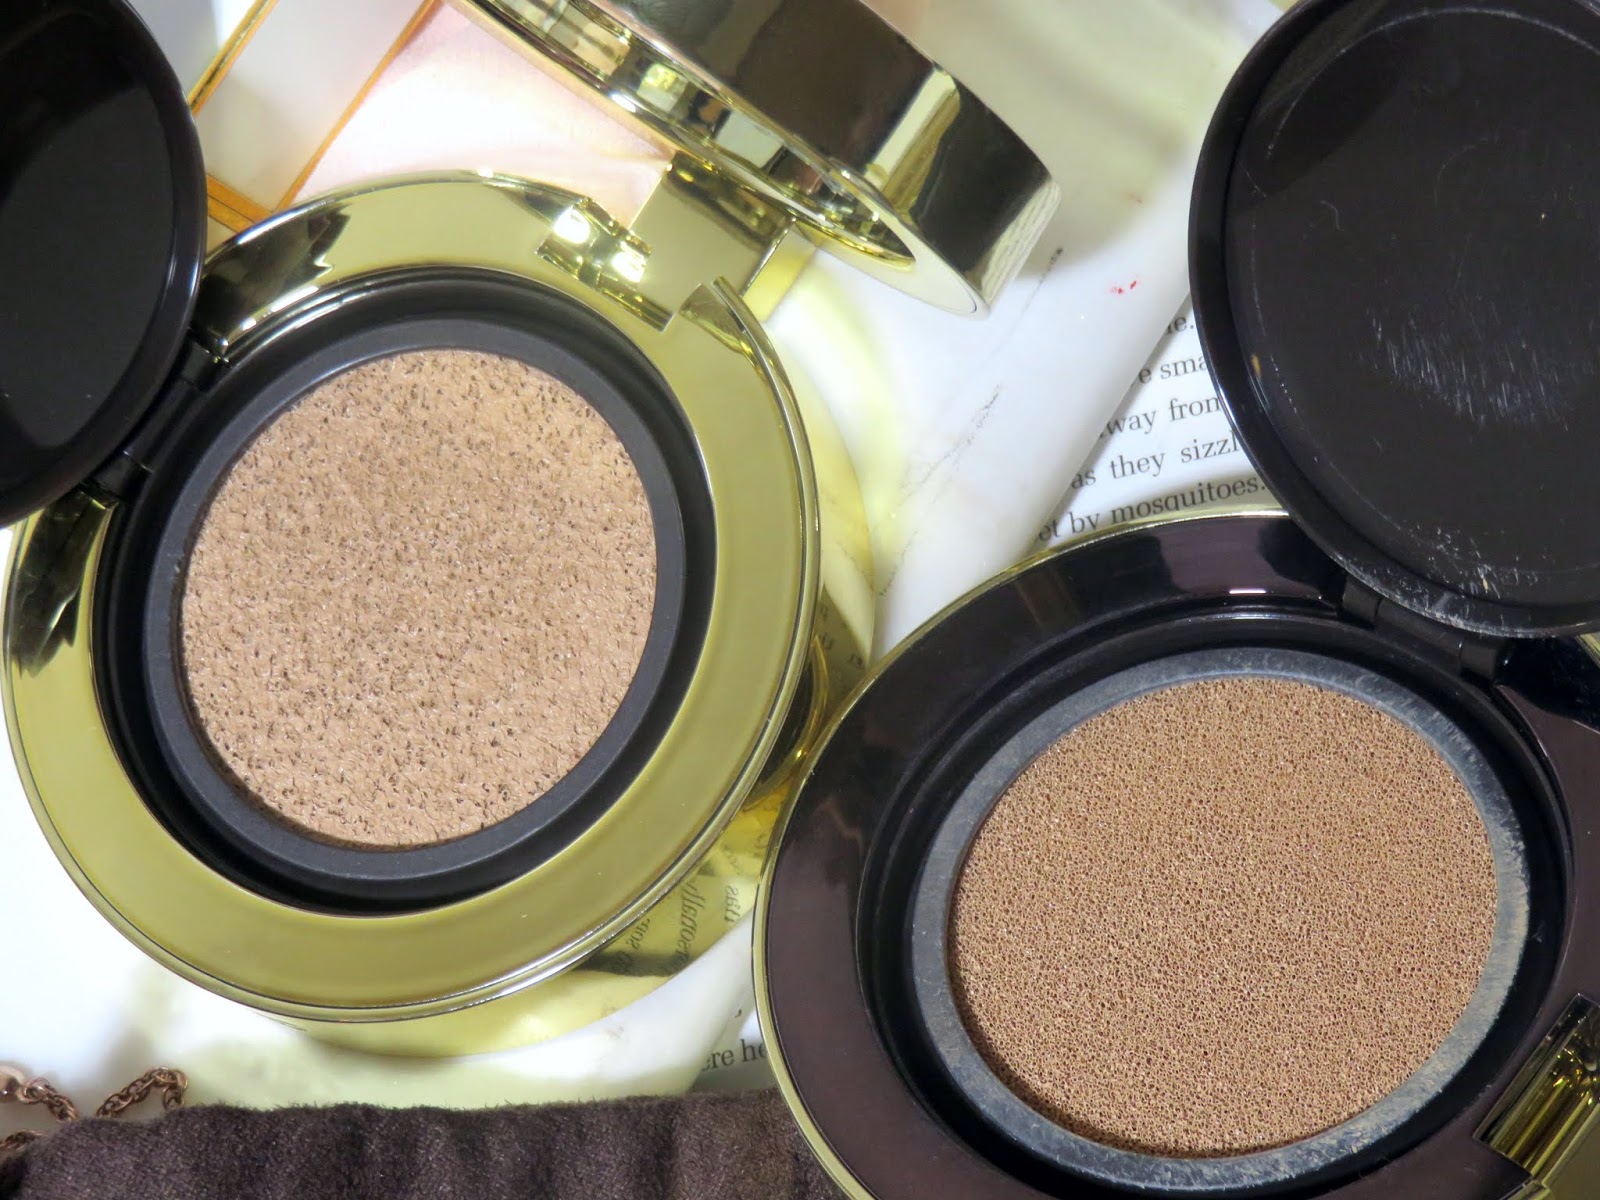 Tom Ford Shade and Illuminate Soft Radiance Cushion Compact Foundation Review and Swatches